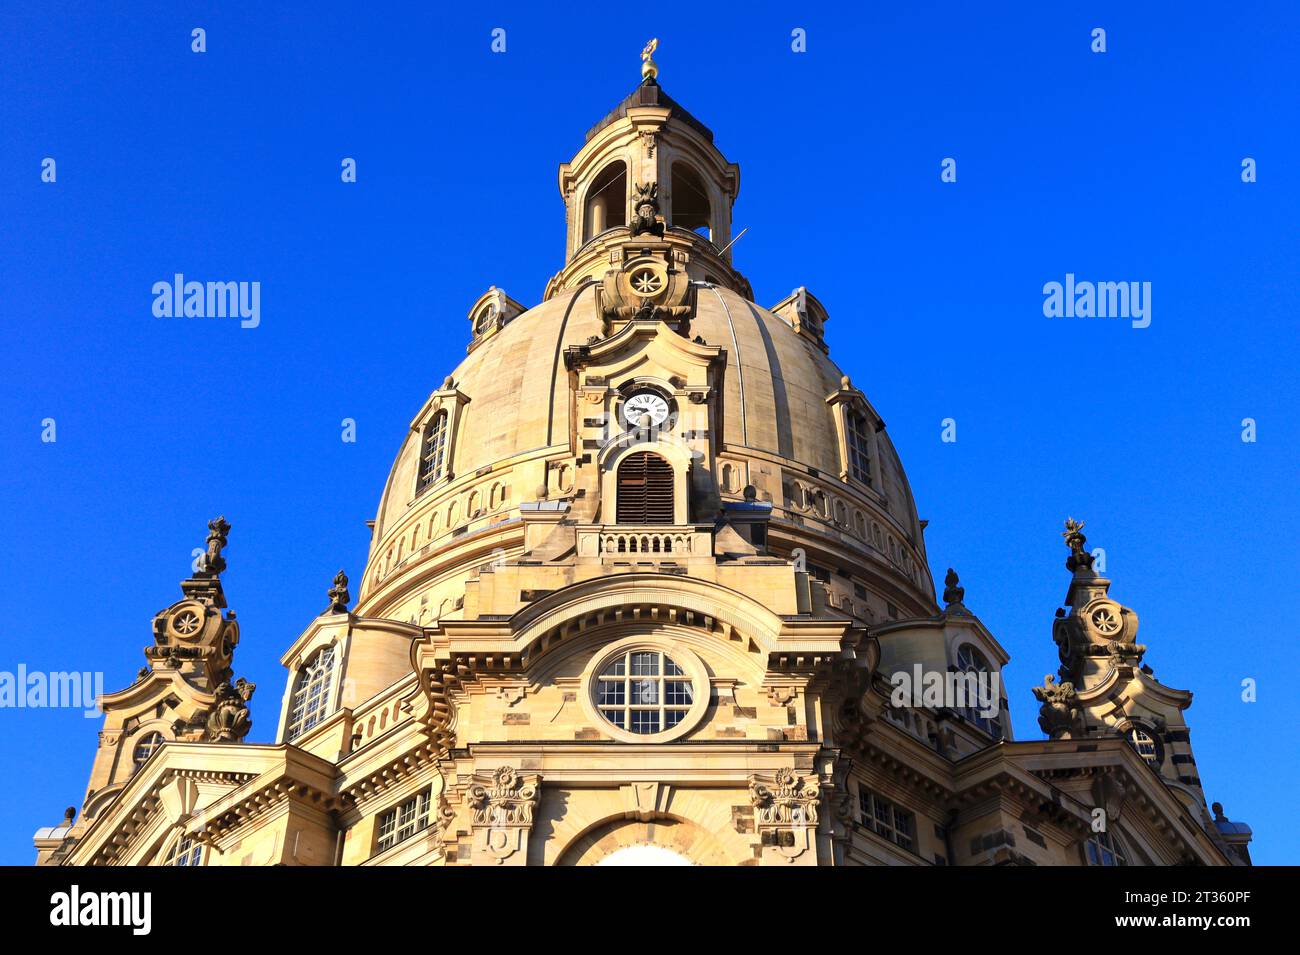 Germany, Saxony, Dresden, Dome of Dresden Frauenkirche against clear blue sky Stock Photo